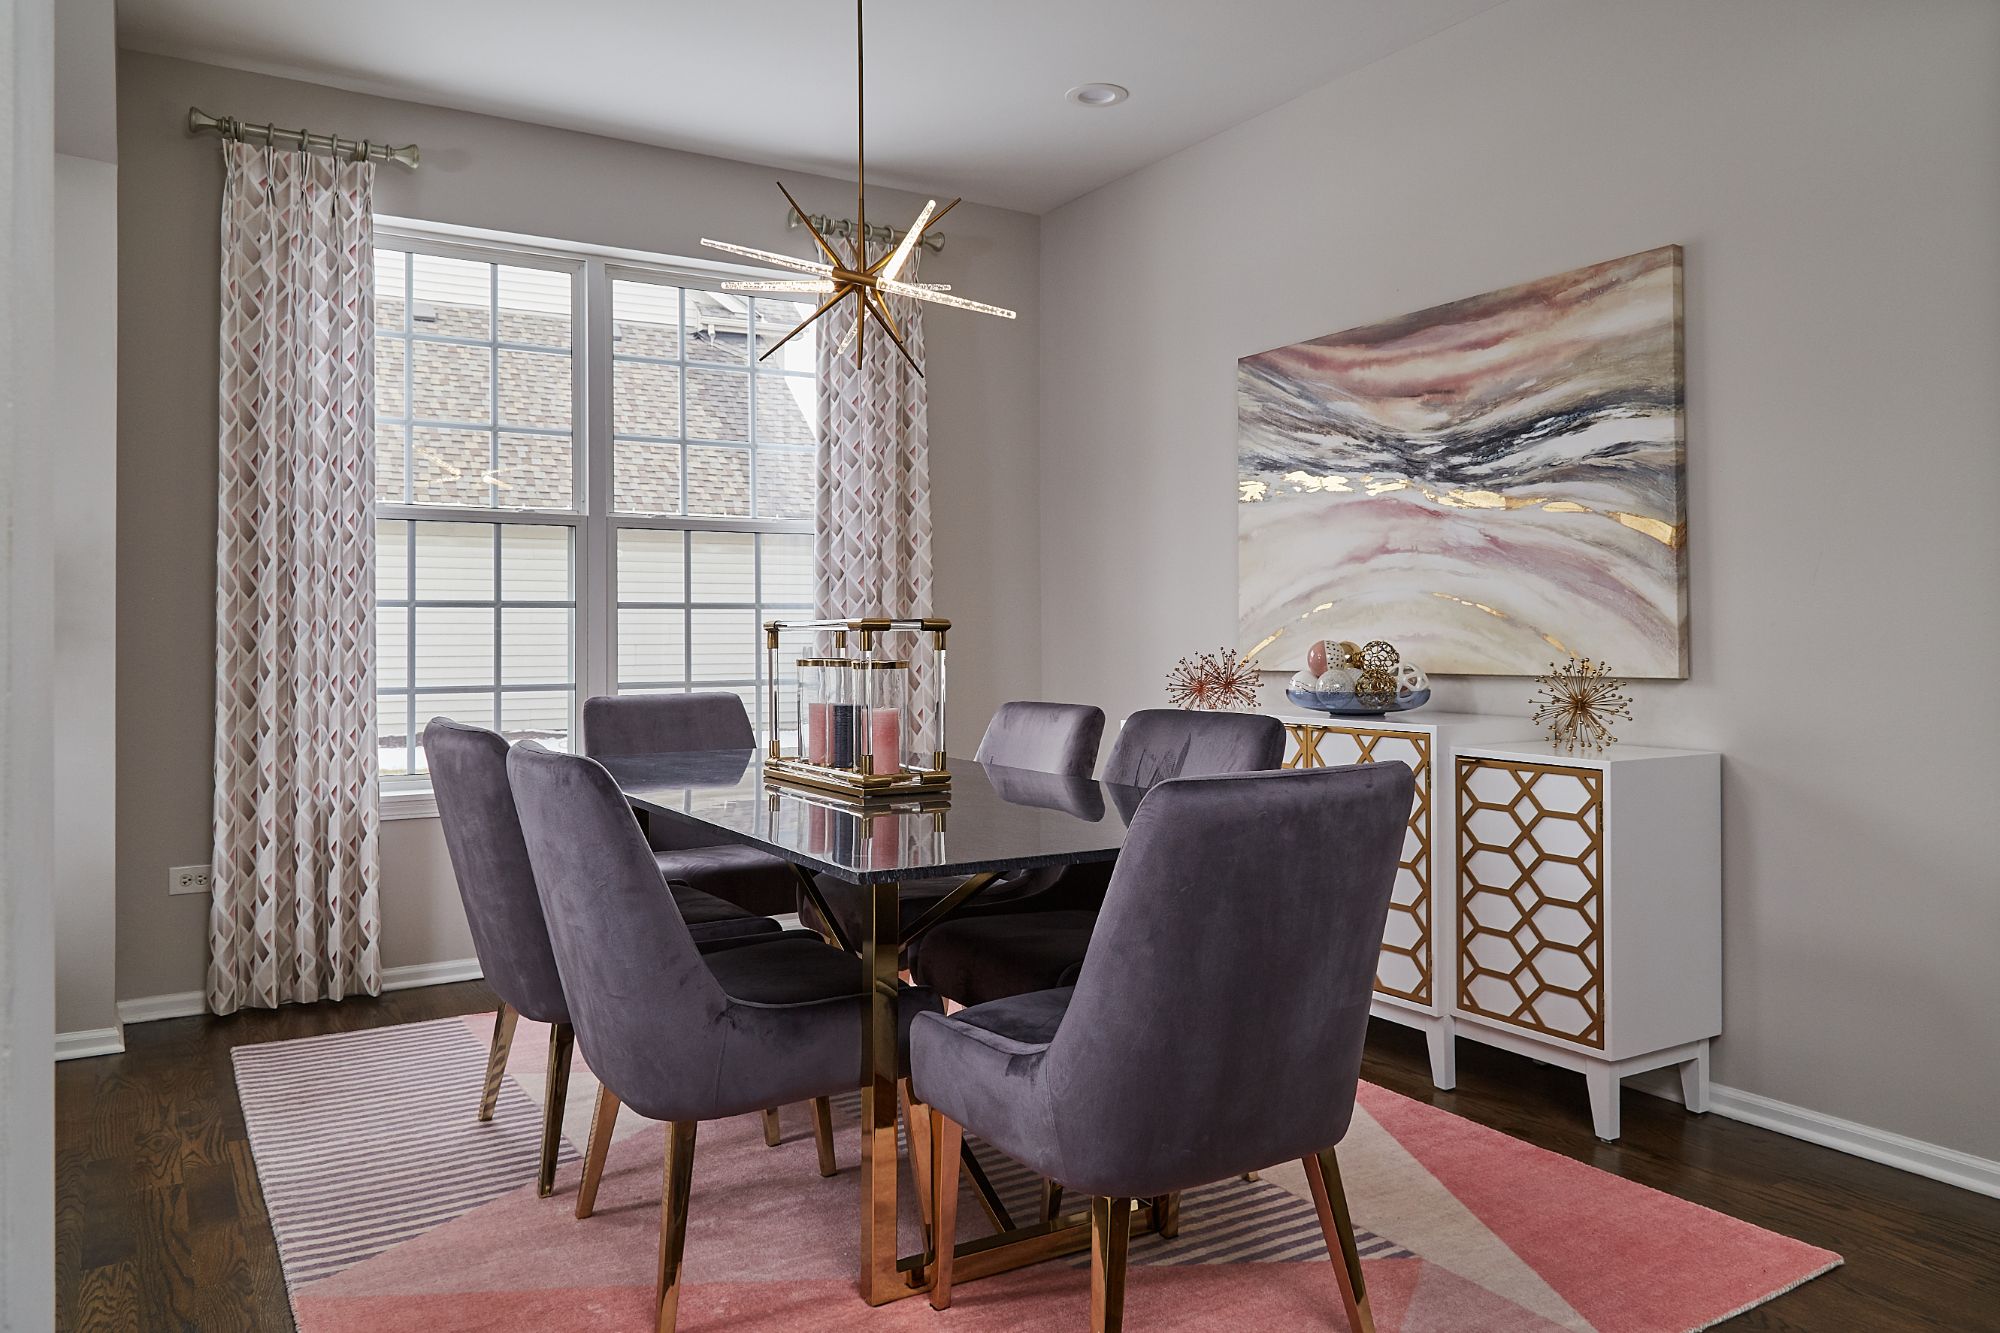 Consider a new light fixture in your dining room